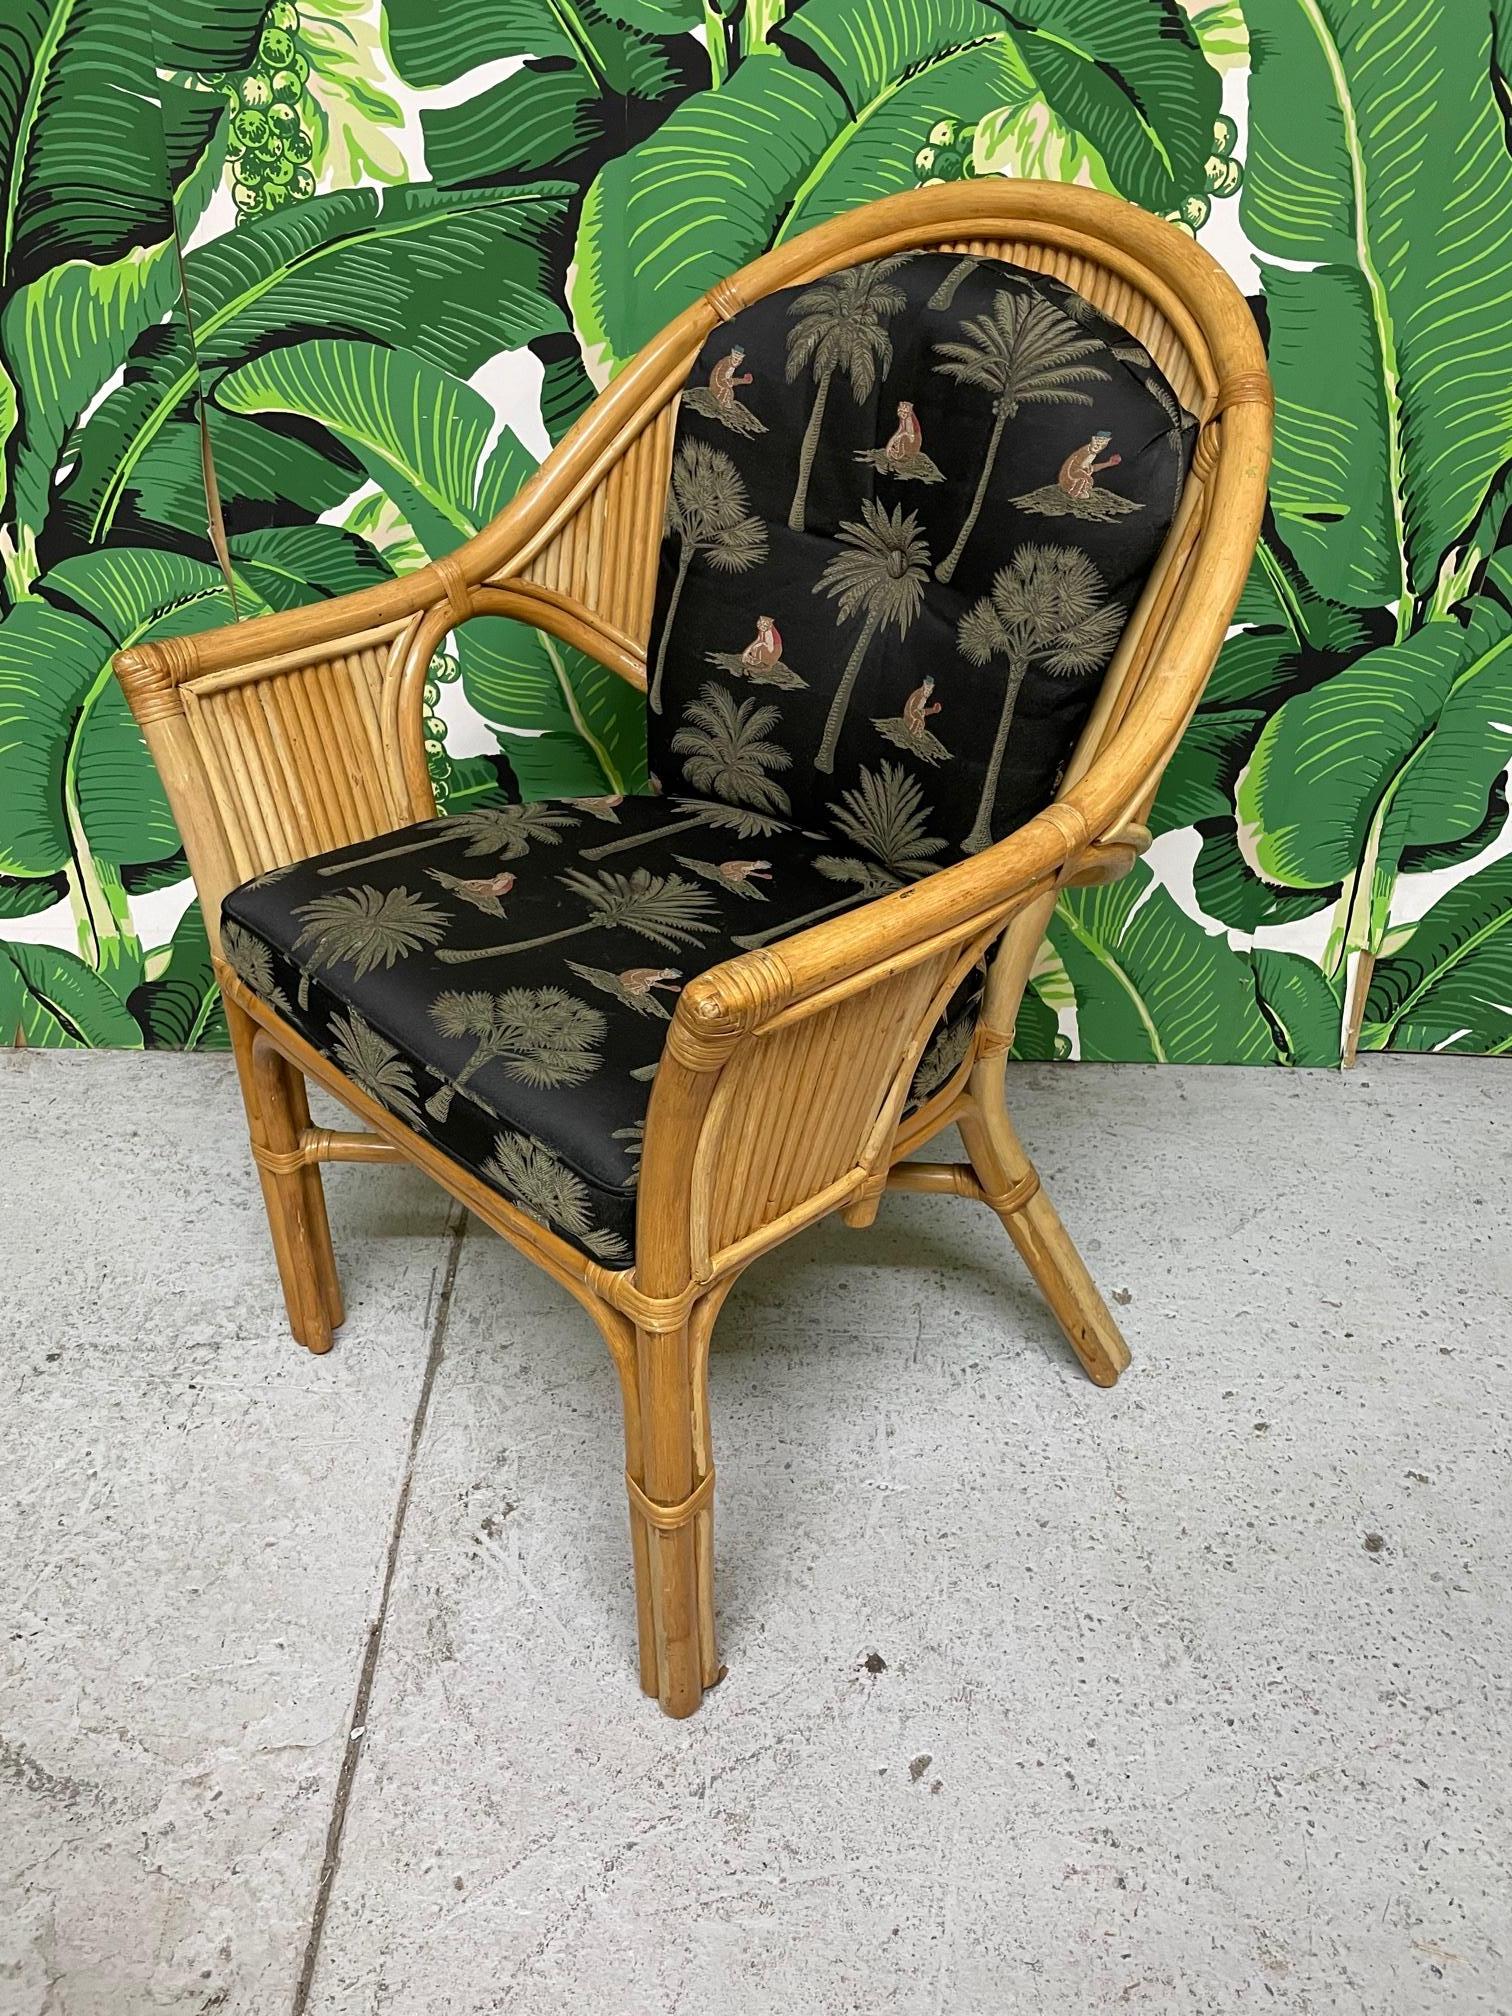 Set of six vintage rattan dining or club chairs veneered in pencil reed rattan and upholstered in a tropical palm print. Very good condition with minor imperfections consistent with age.